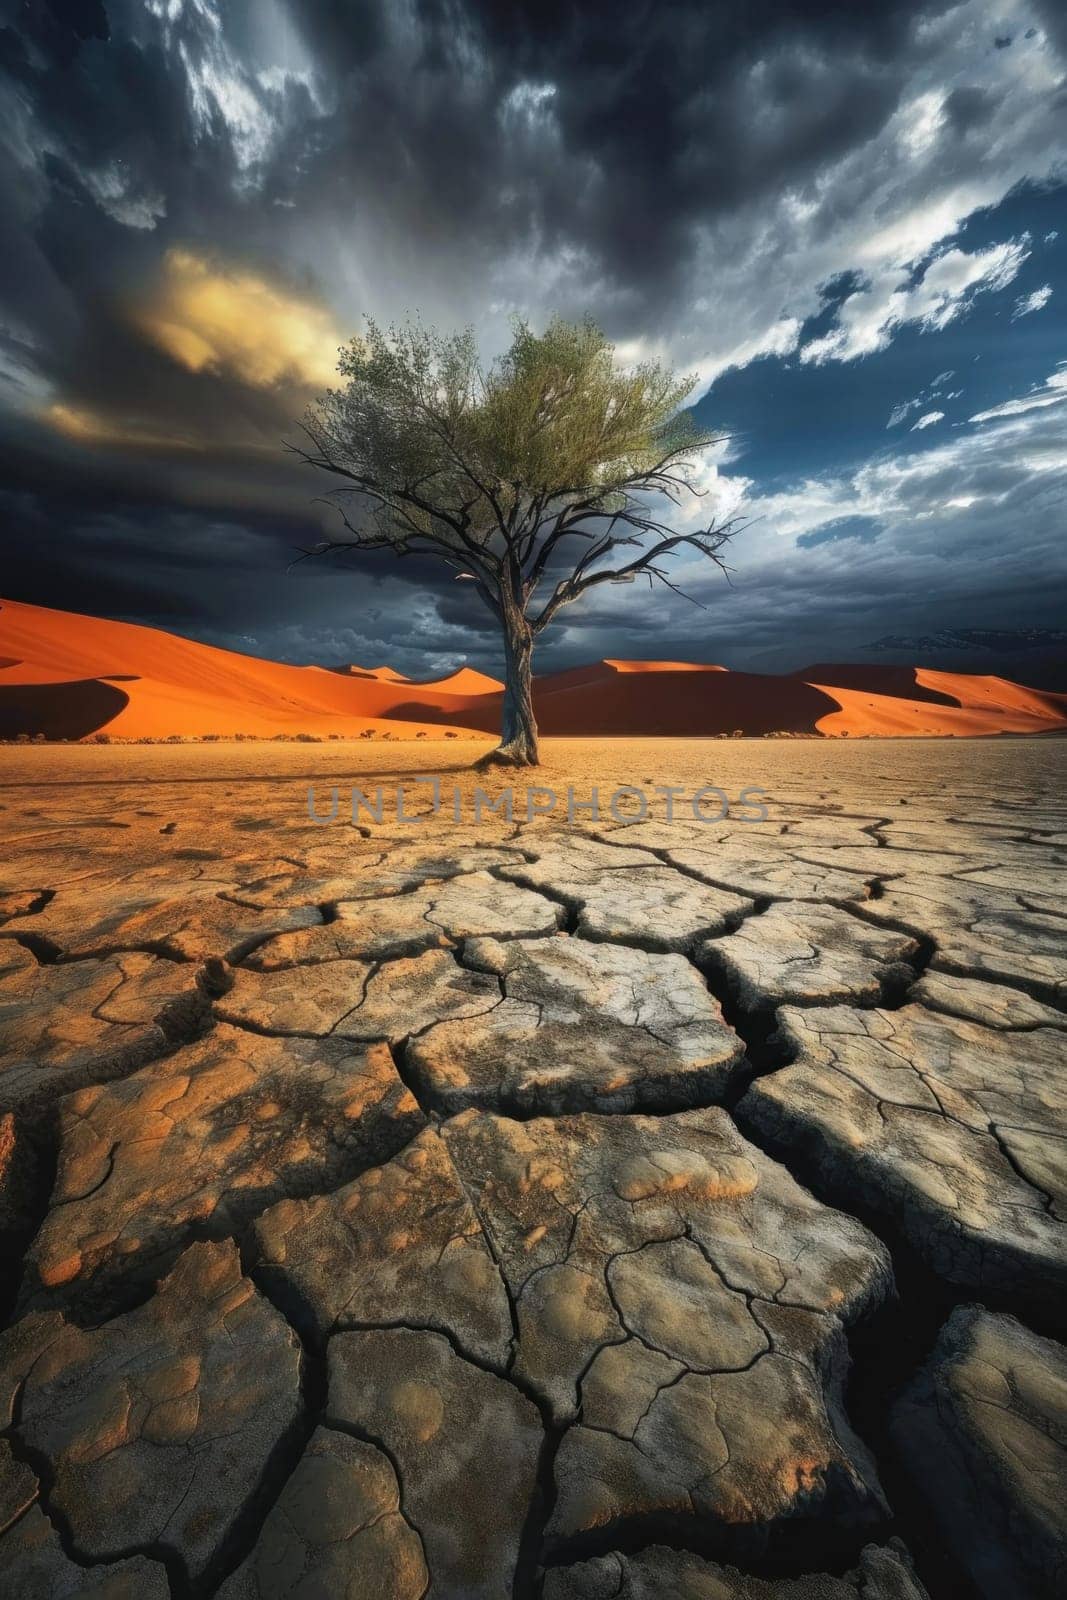 Solitary tree in dry desert under stormy sky symbol of resilience and survival amid harsh conditions